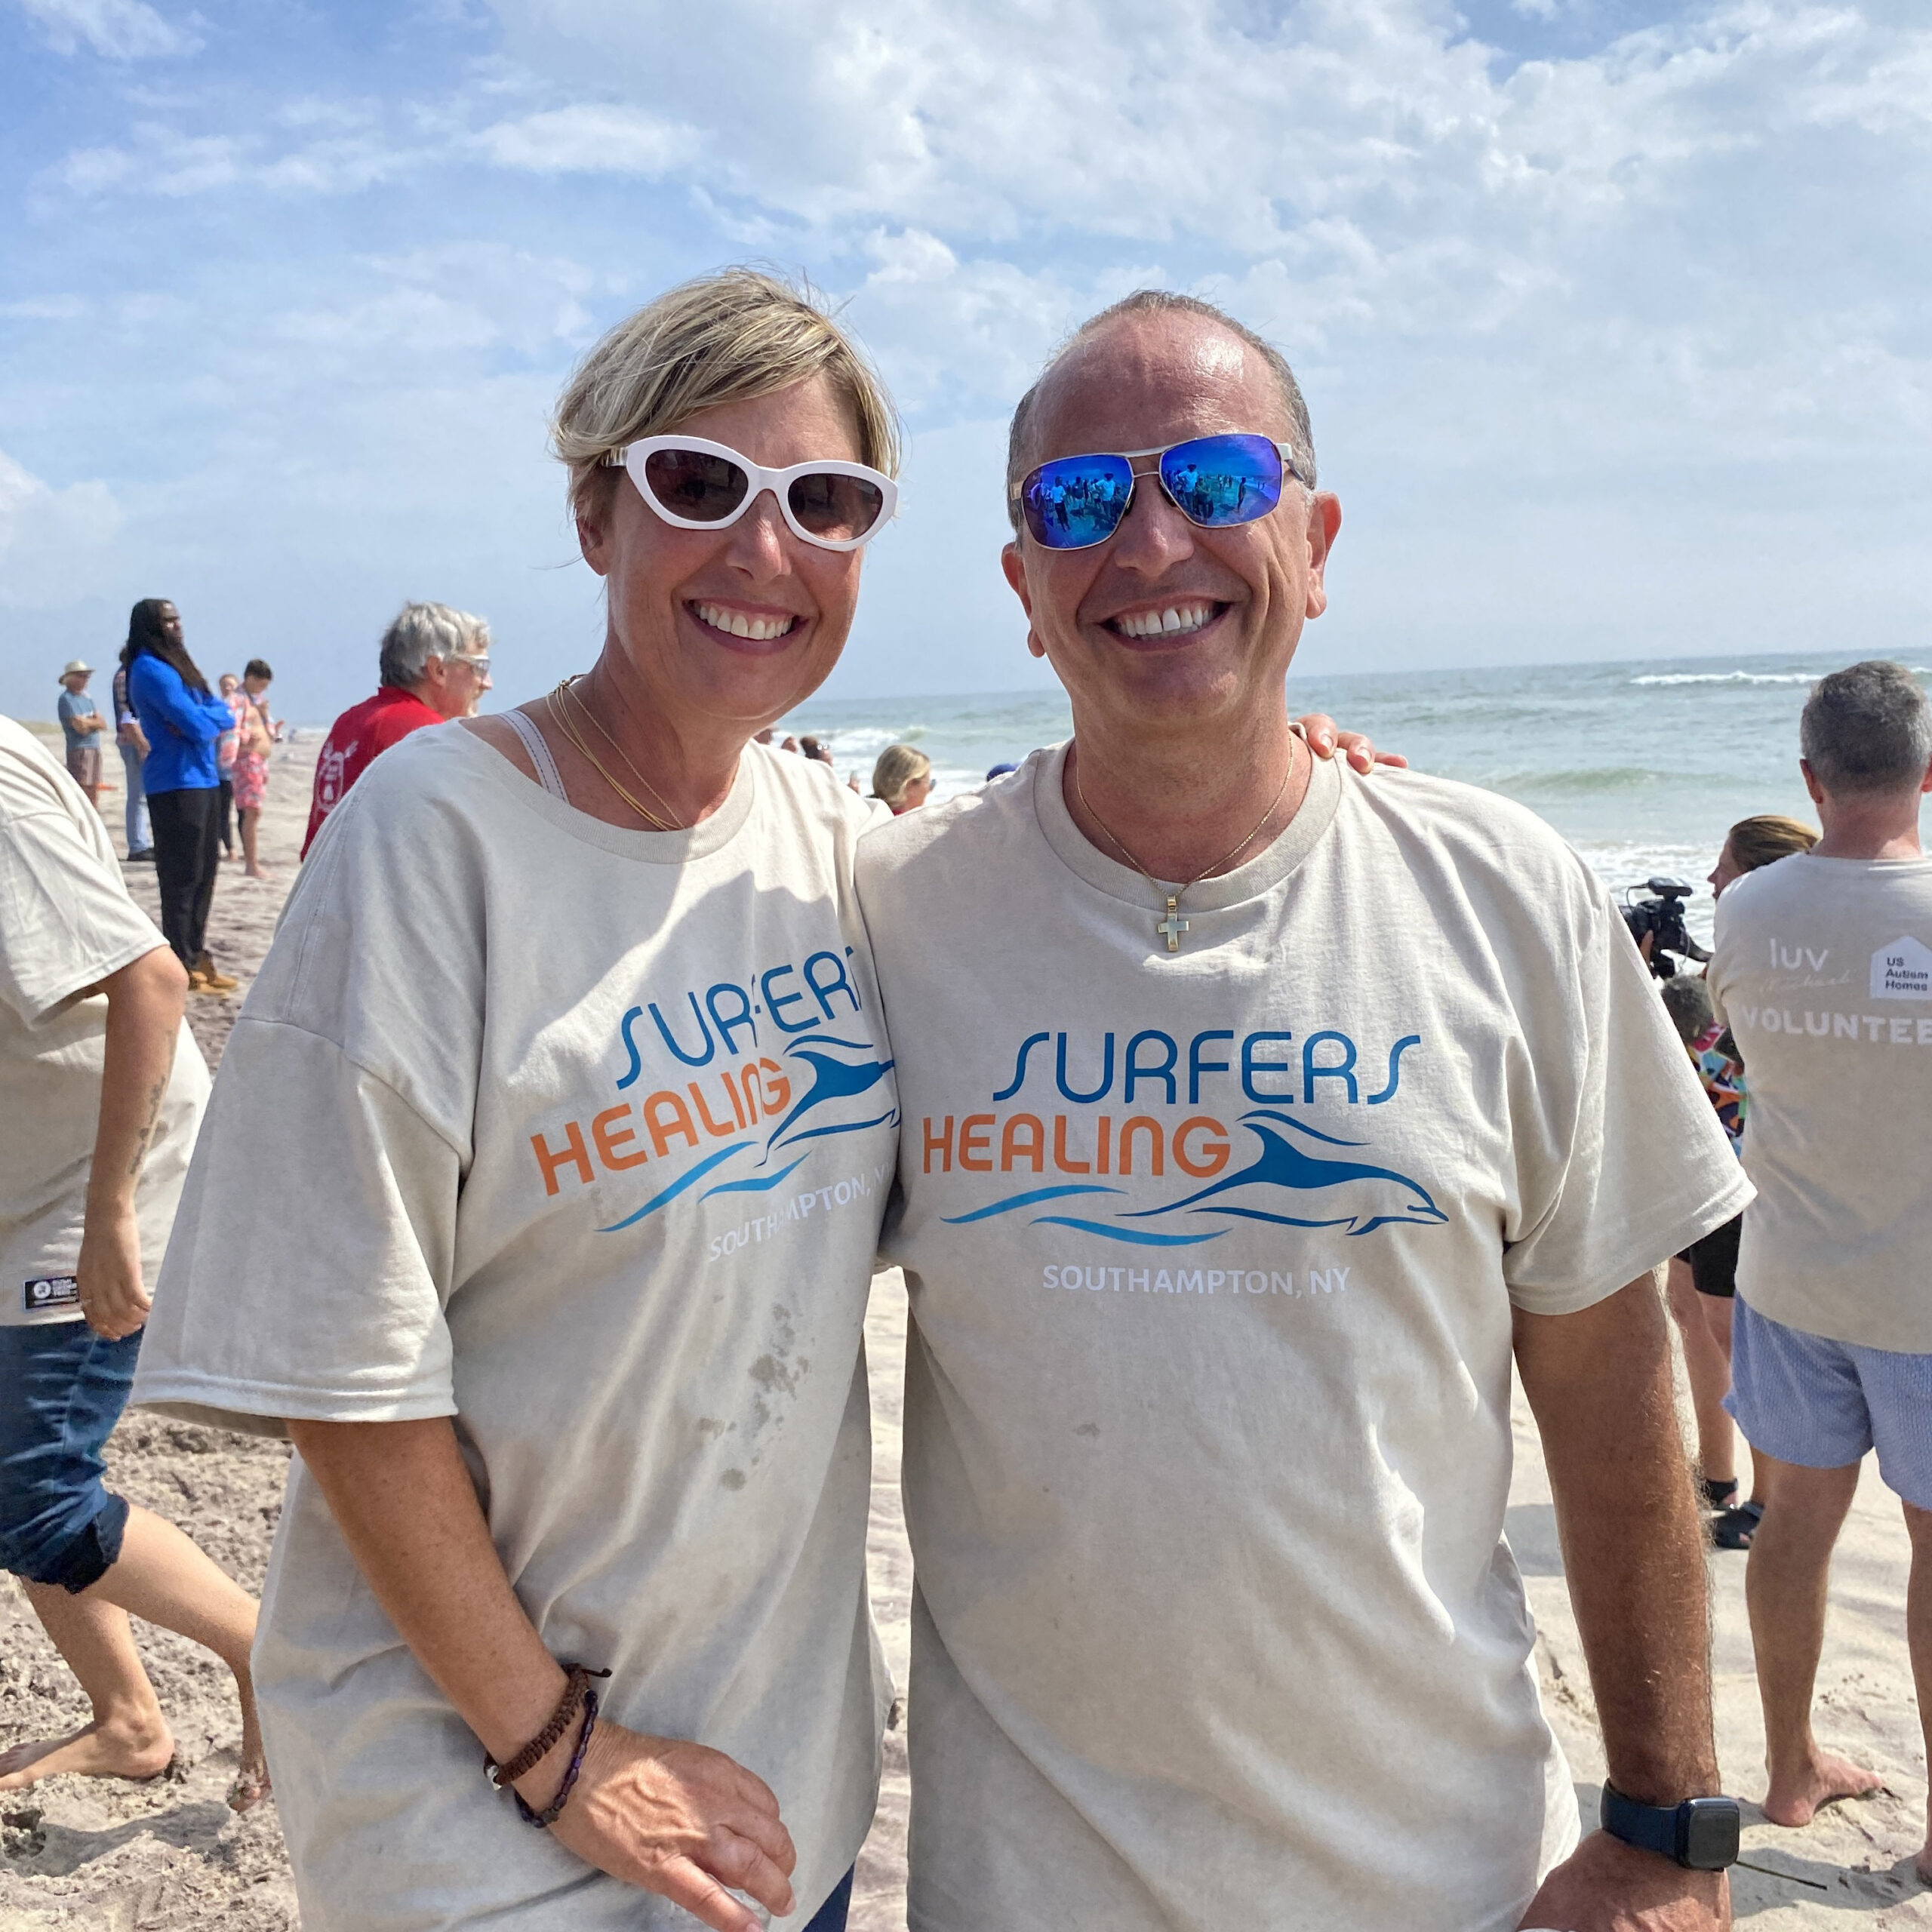 Lisa Libertore, founder of Luv Michael, a nonprofit that creates job opportunities for individuals with autism, and her husband Dimitri Kessaris. Luv Michael is the local organization that underwrote the cost of bringing Surfers Healing to the area. KIM COVELL